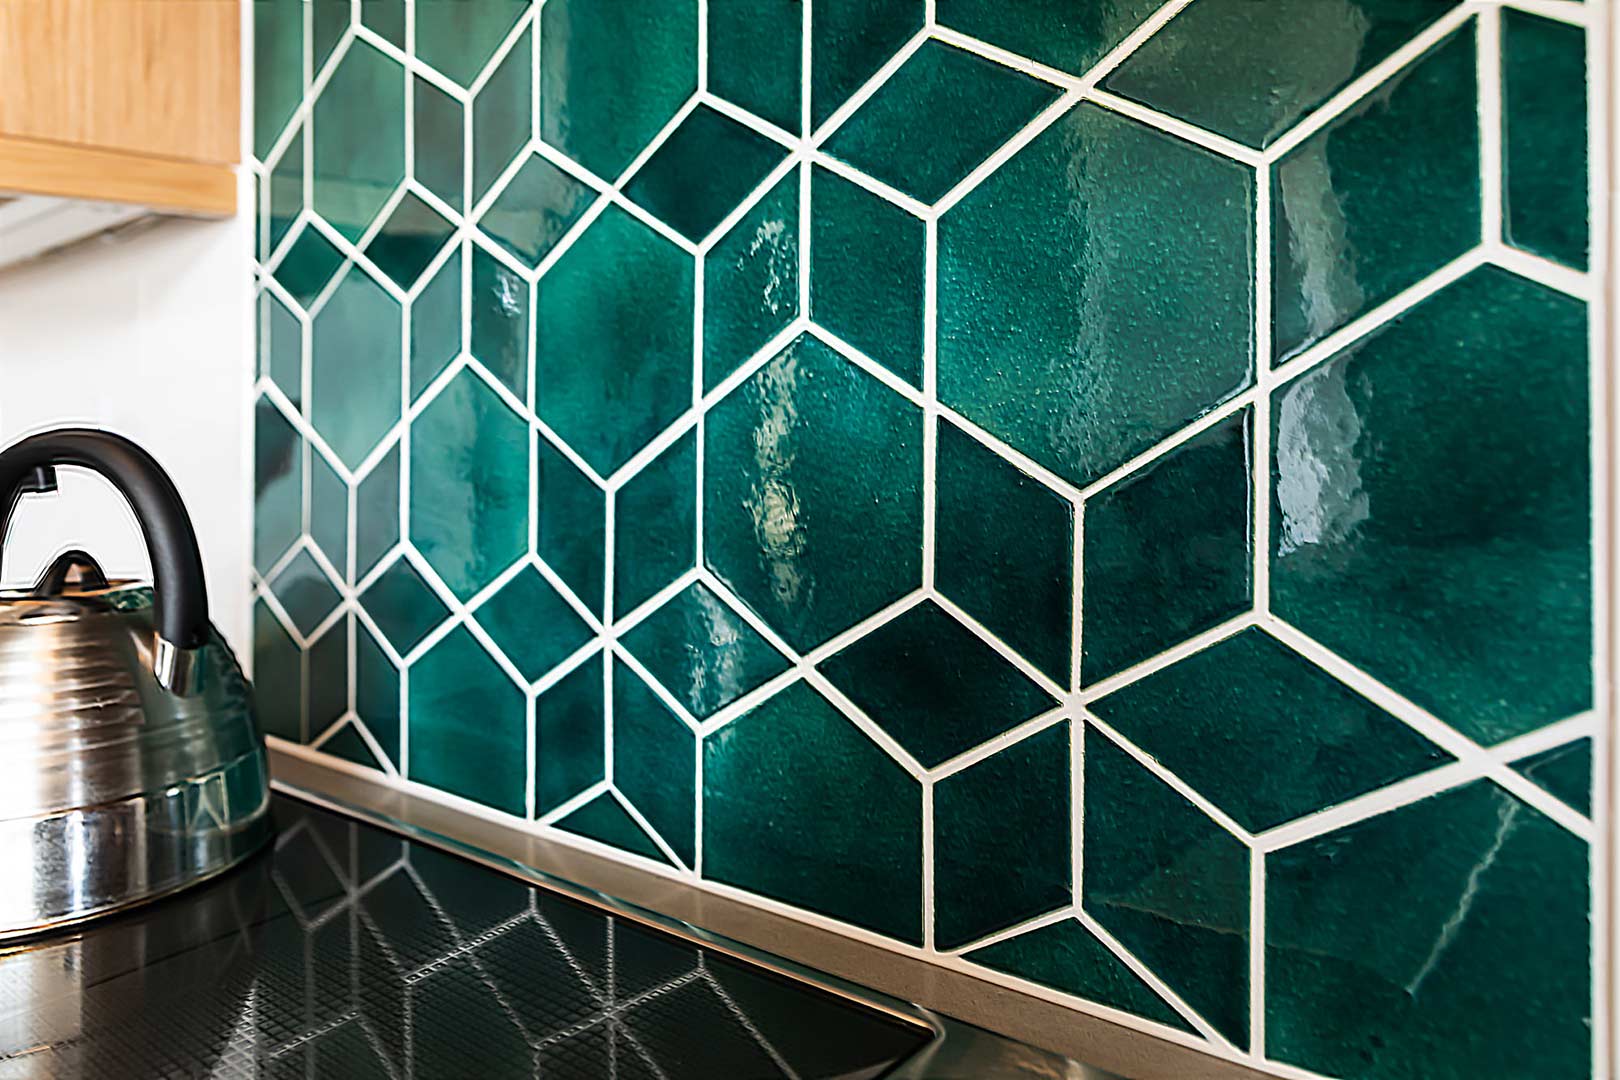 Detailed show of the custom backsplash mosaic tile installed in-house by Freestone Design-Build.